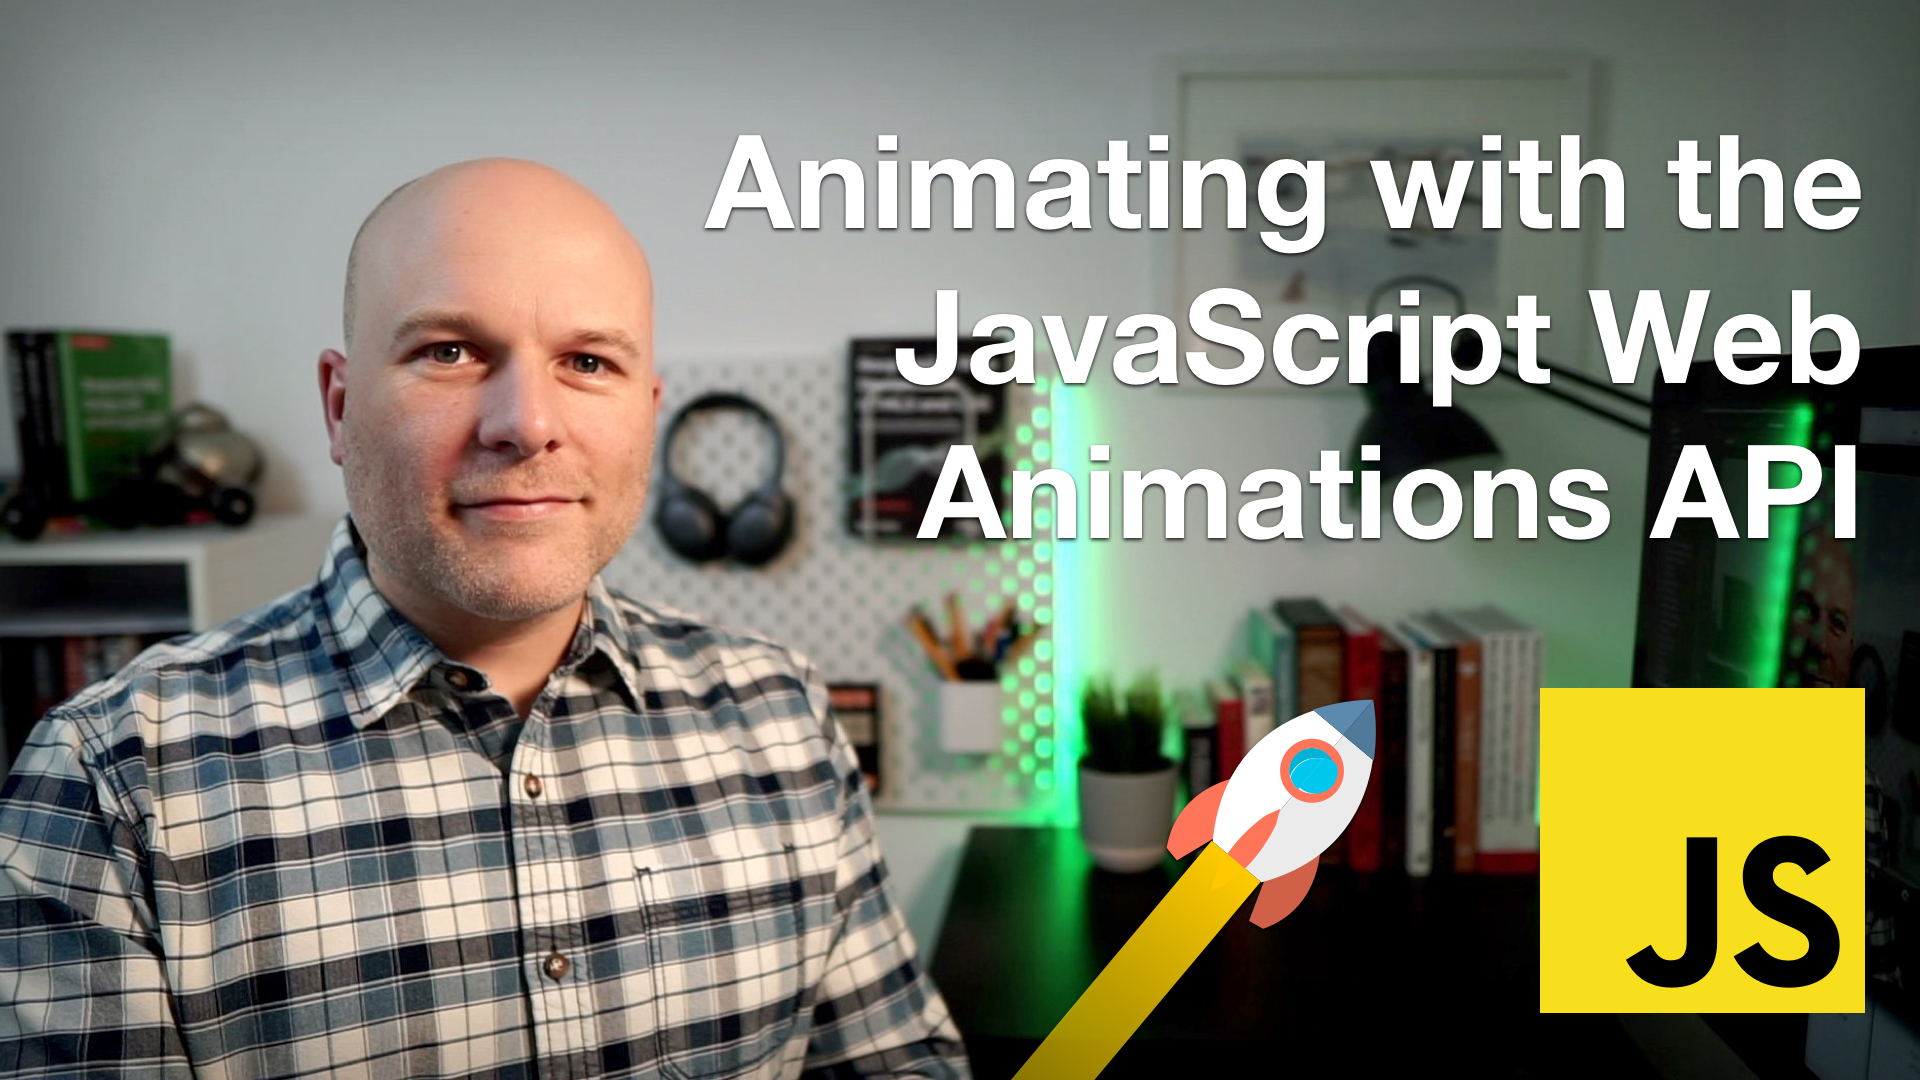 Poster image for JavaScript animation course